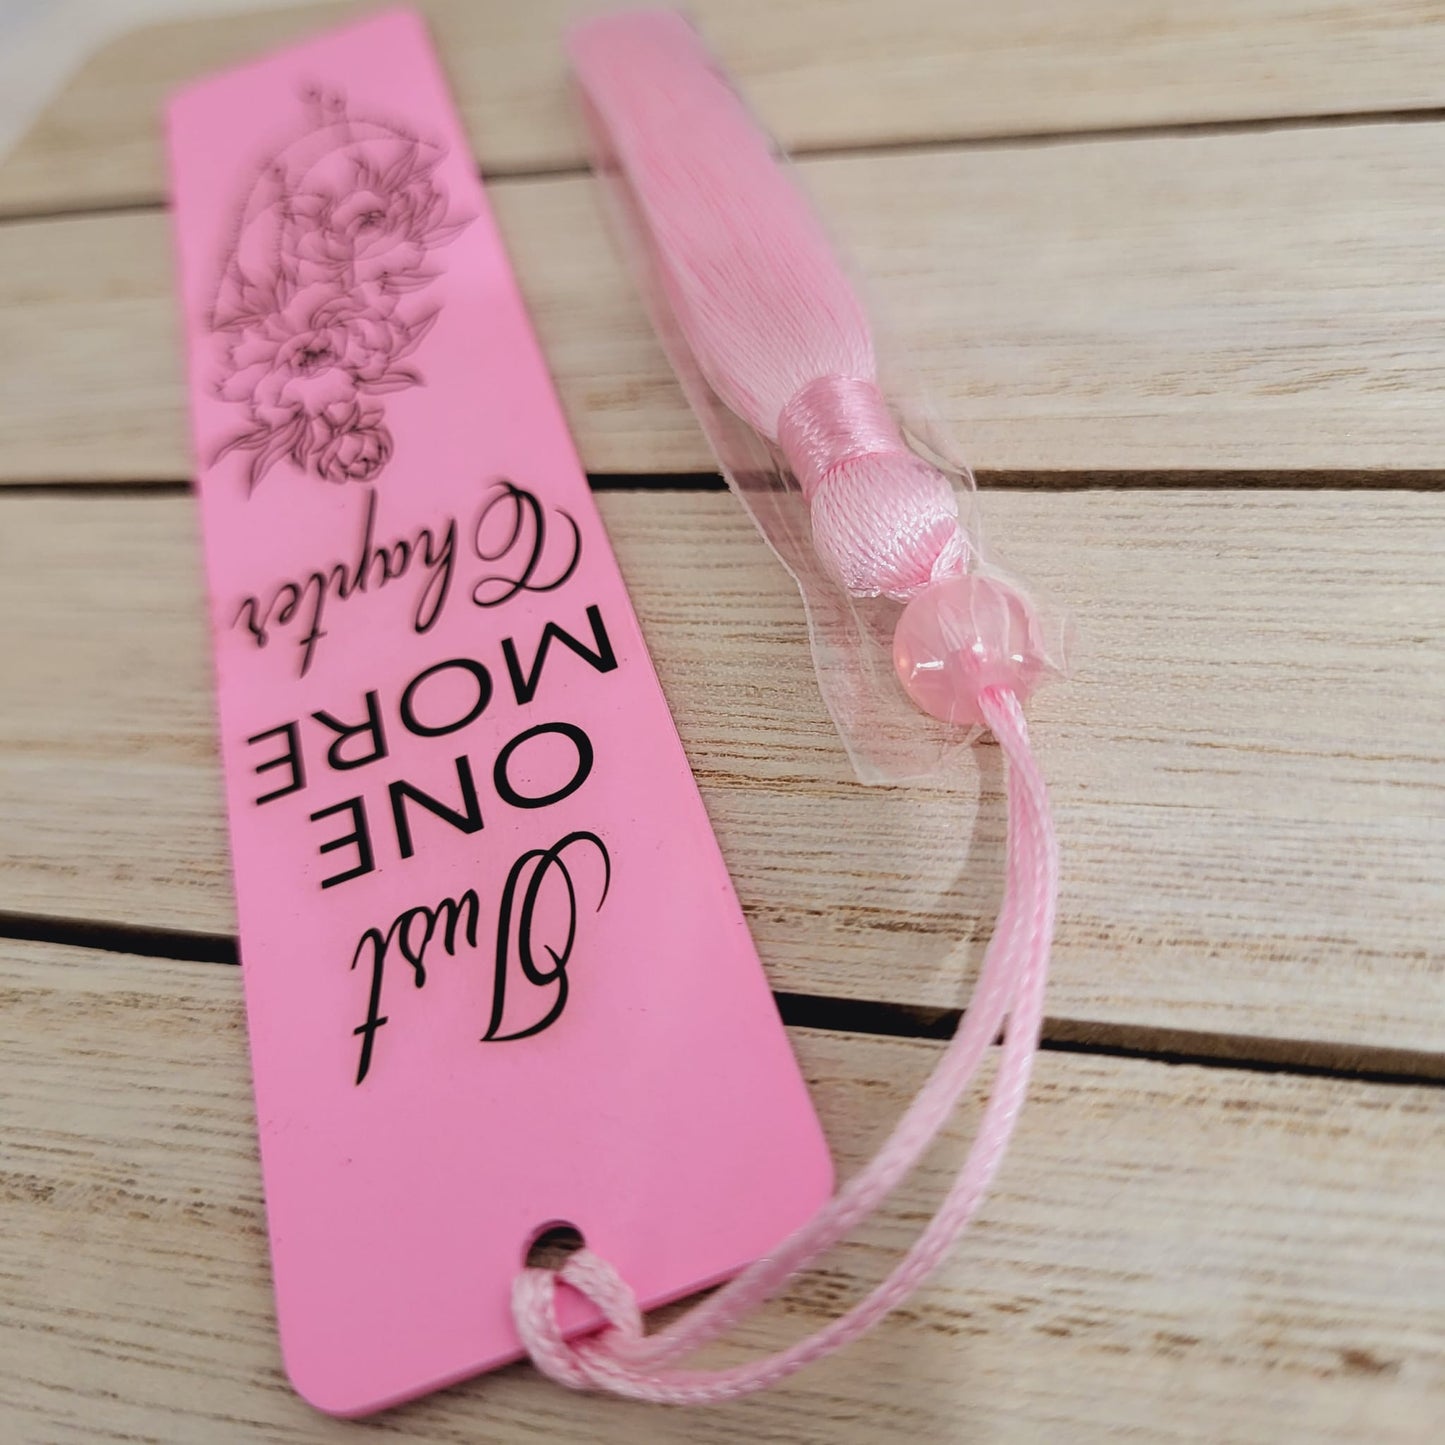 Pink Bookmarks - Just One More Chapter for Girls, Kids, Children, Women - Stainless Steel Bookmark with Pink Tassel